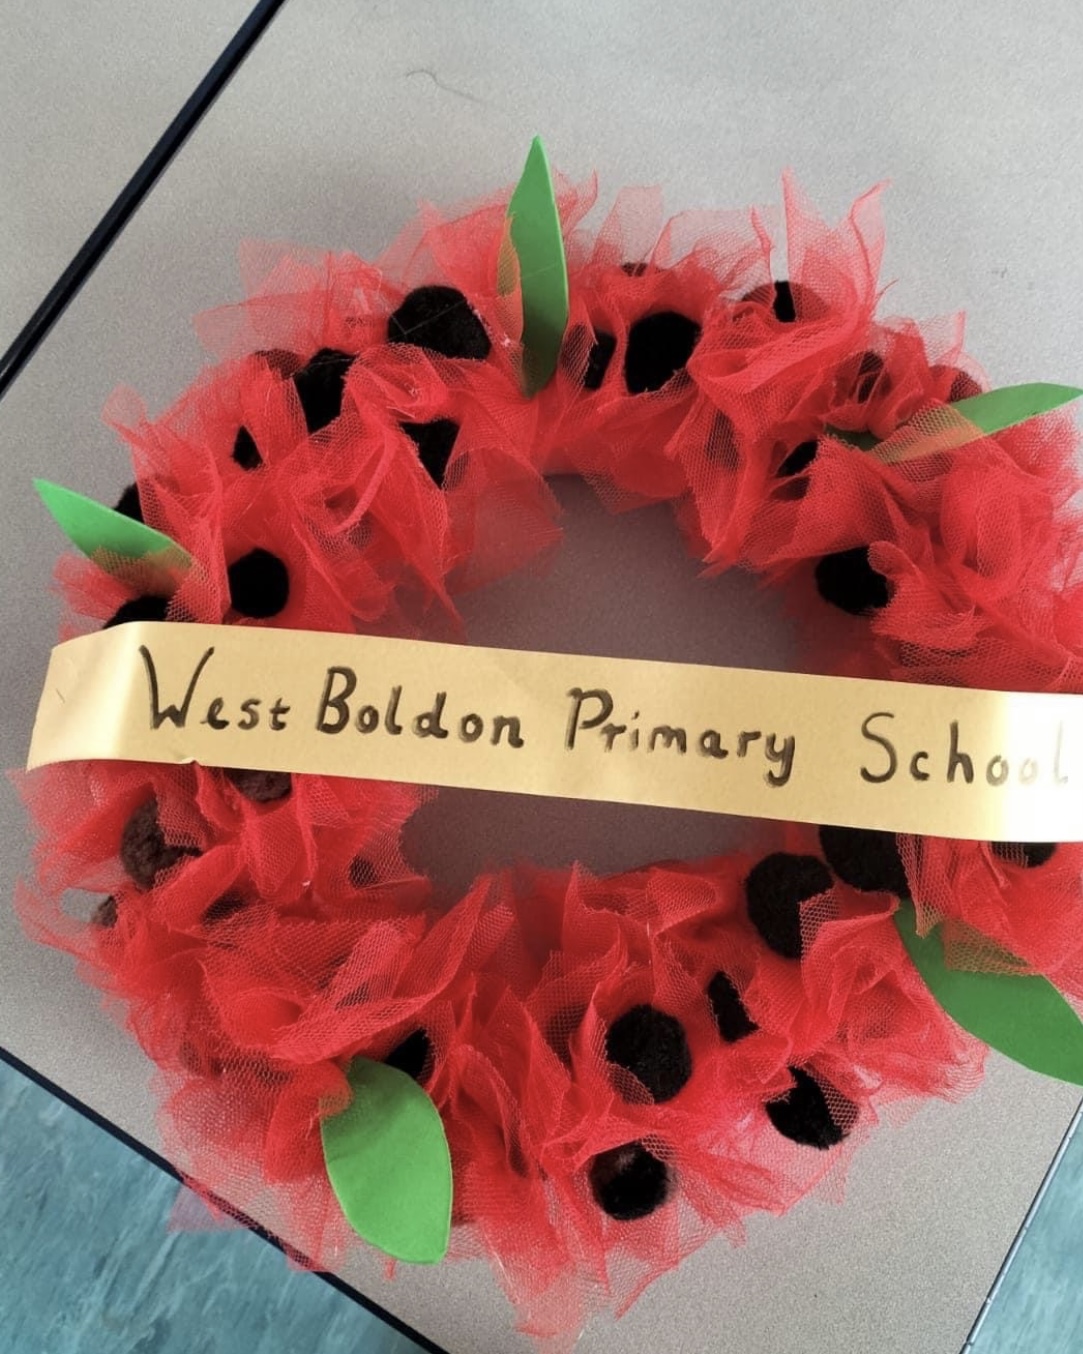 West Boldon Primary Schools wreath for the Boldon cenotaph